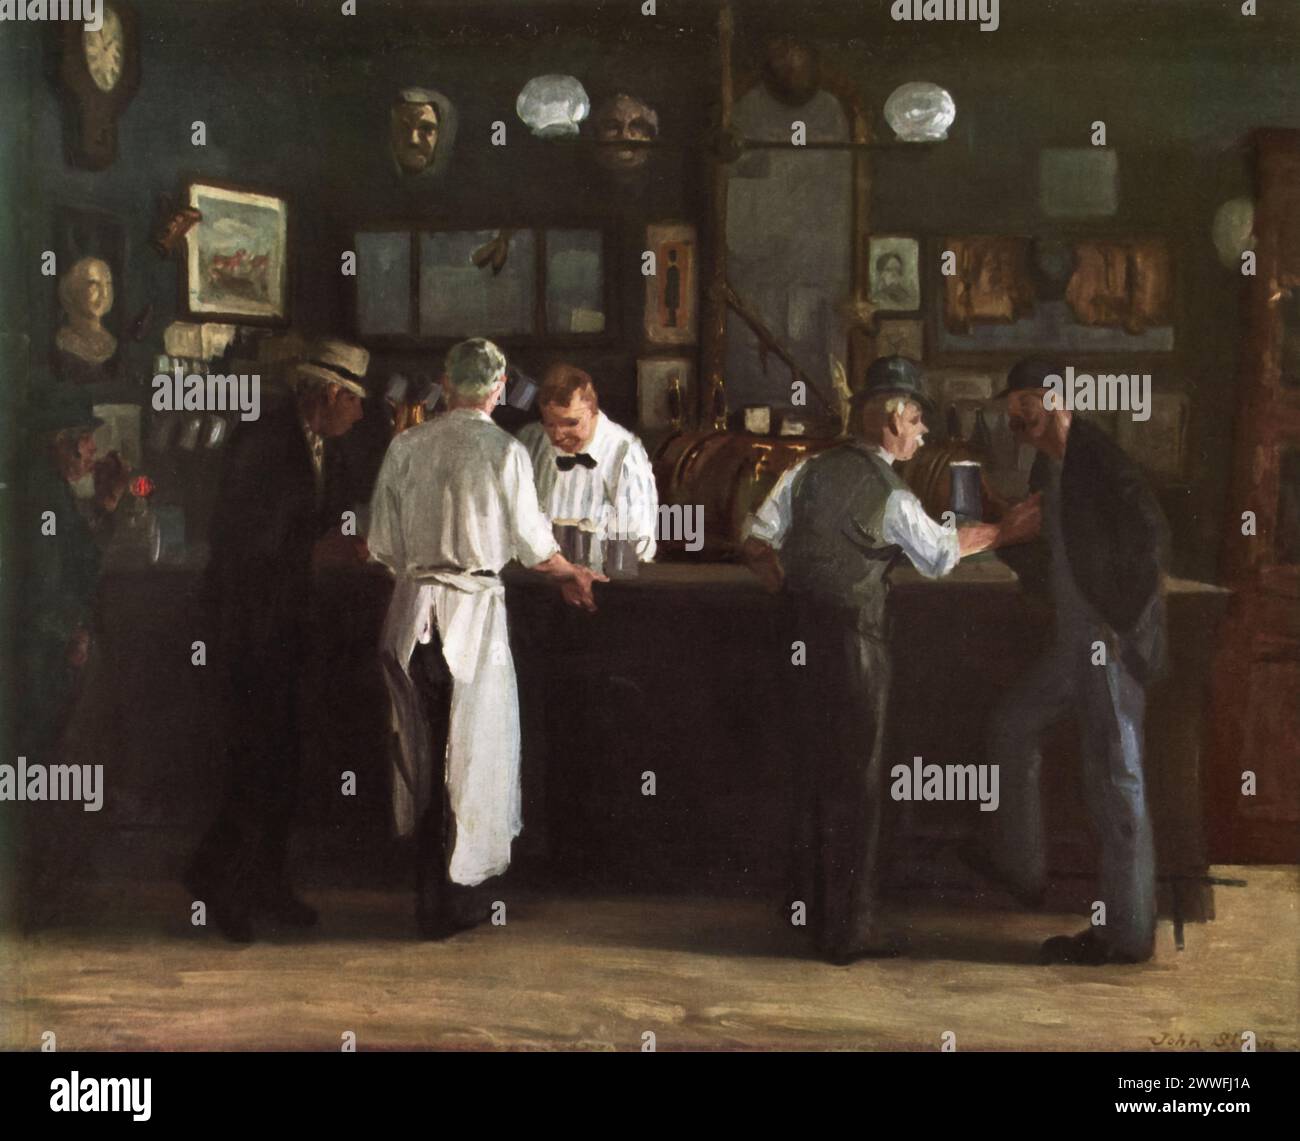 John Sloan's 'McSorley's Bar' (circa 1912): Located in the Detroit Institute of Arts, this painting captures the interior of McSorley’s Old Ale House, one of New York City's oldest bars, frequented by Sloan and other members of the Ashcan School. Sloan's work is celebrated for its vibrant depiction of everyday life, capturing the camaraderie and character of the early 20th-century tavern's patrons with warmth and realism. Stock Photo